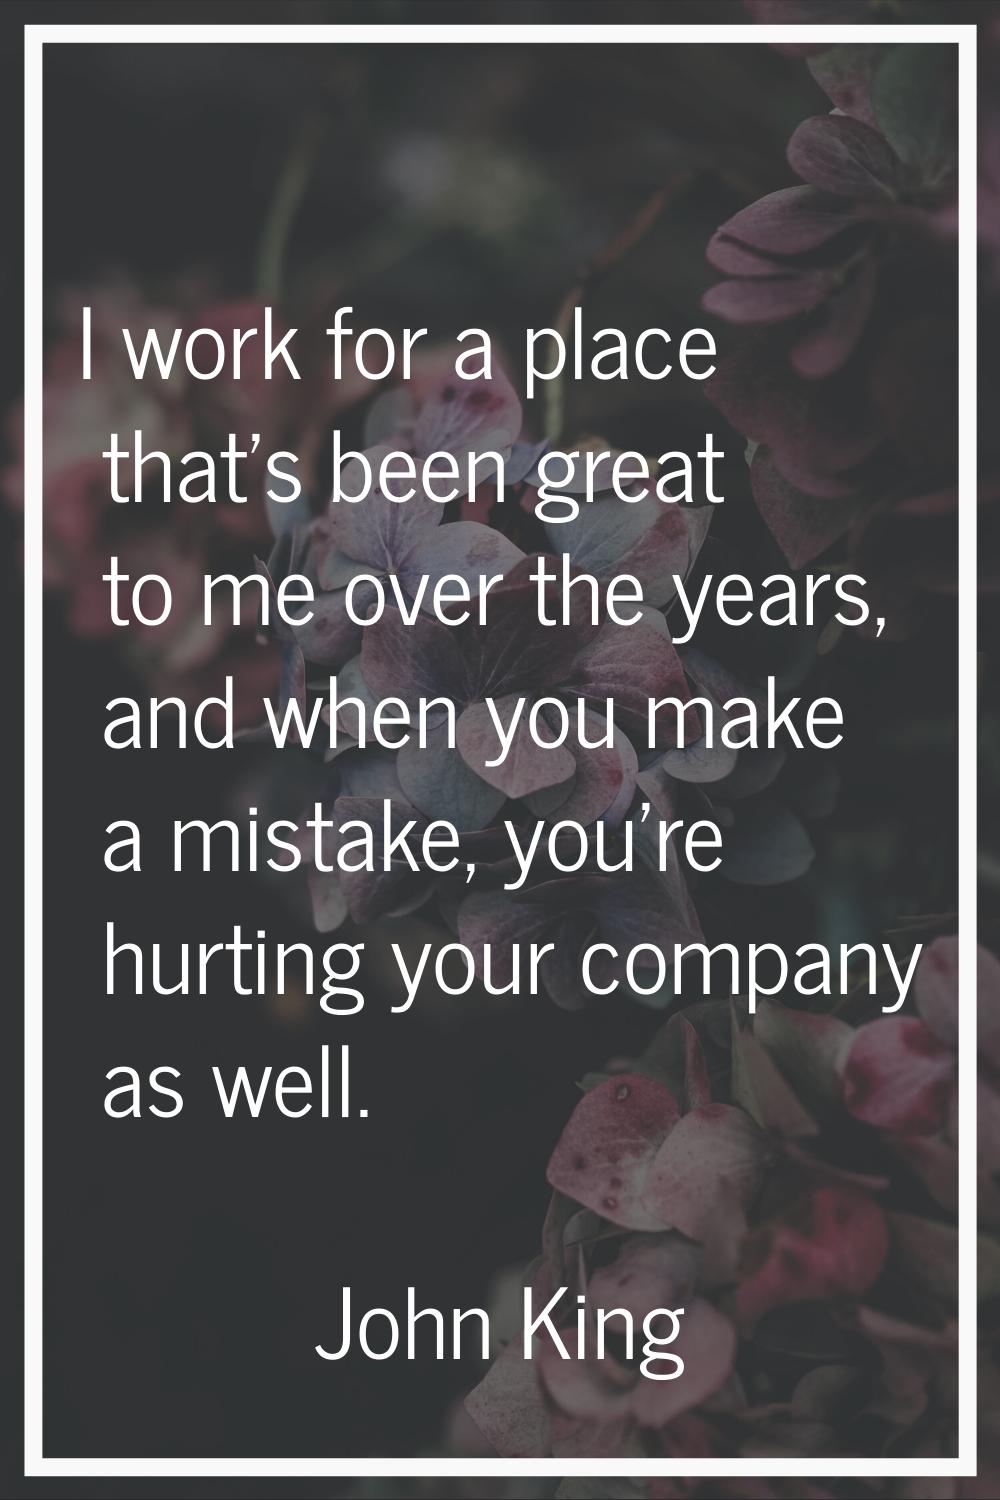 I work for a place that's been great to me over the years, and when you make a mistake, you're hurt